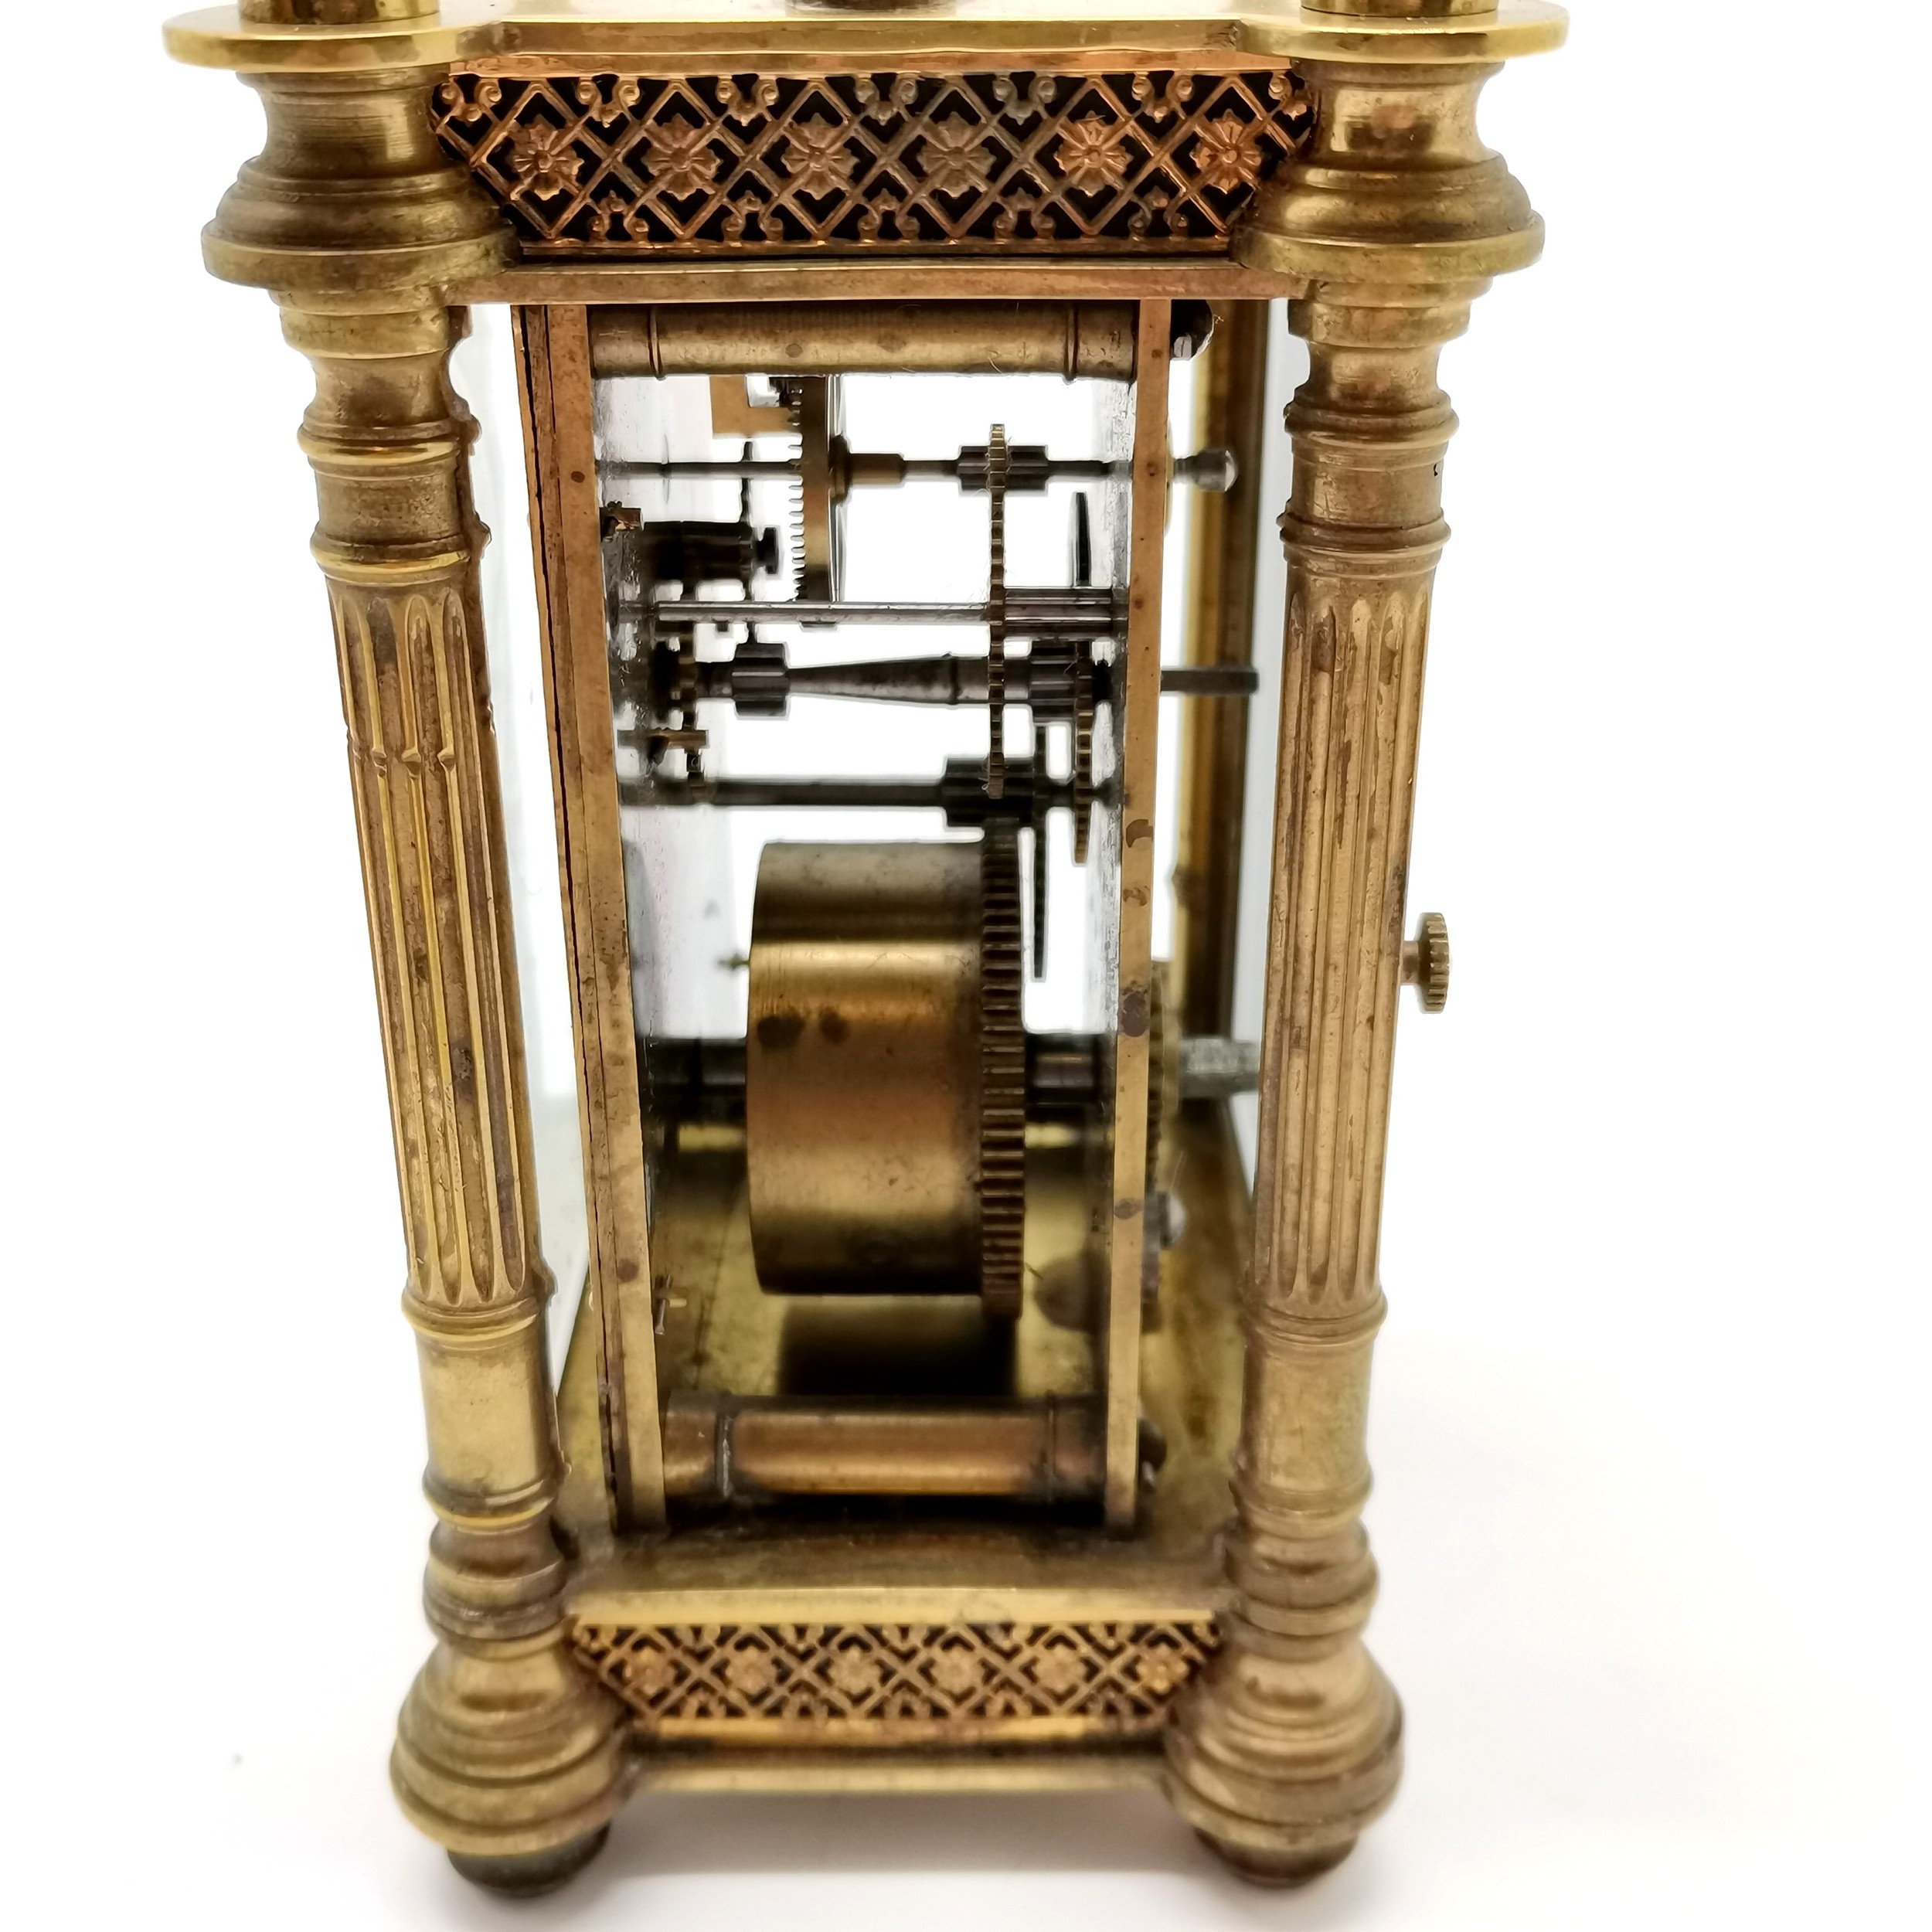 Antique brass cased carriage clock with fluted column detail - 13cm high & running at time of - Image 3 of 5